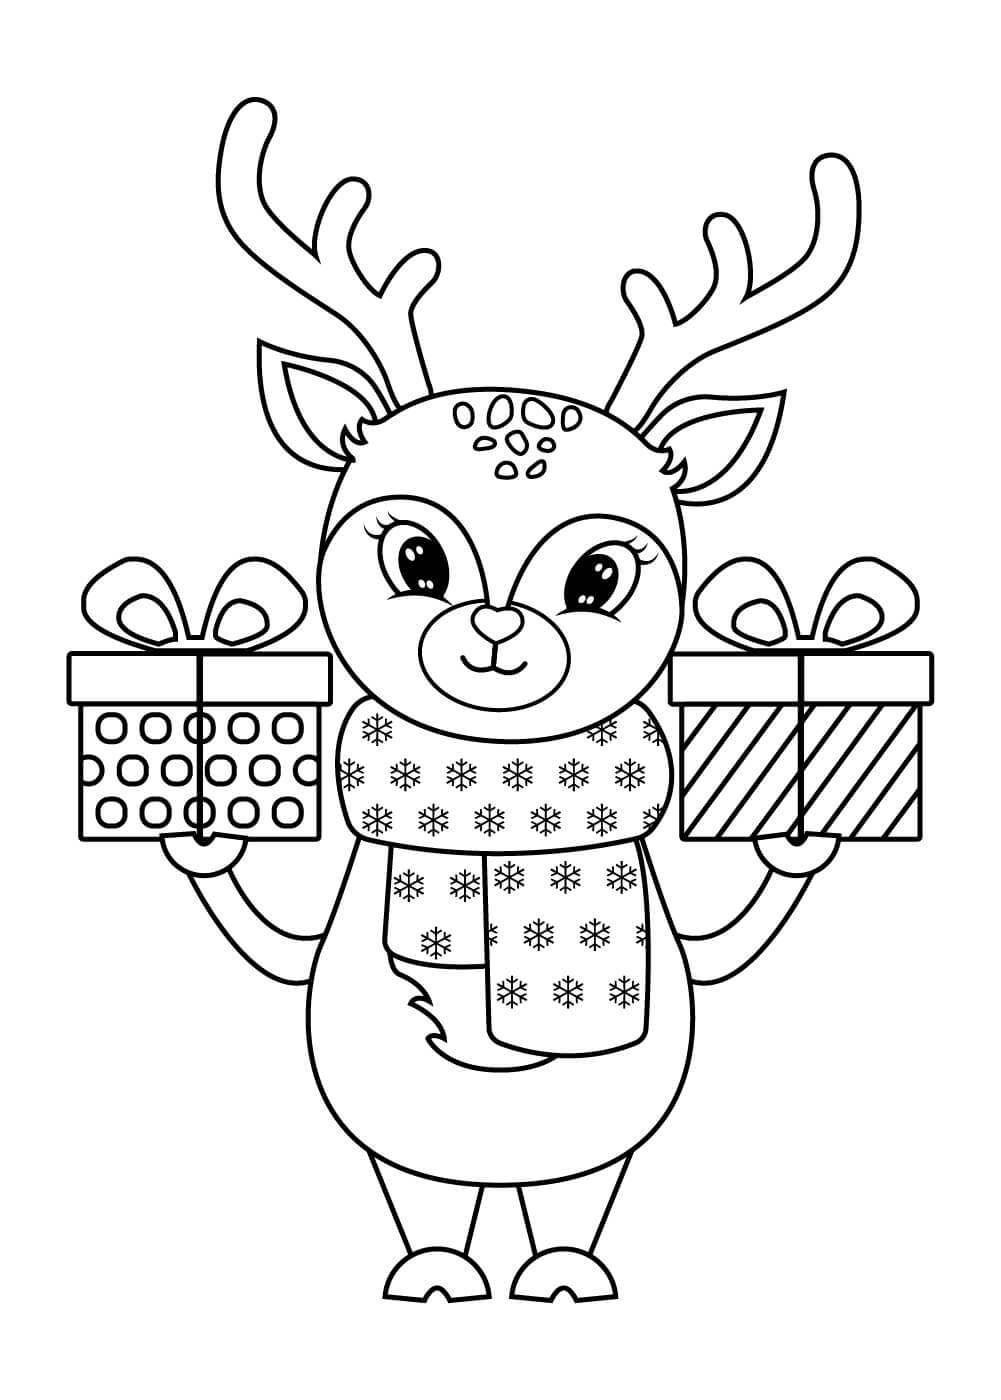 Reindeer is holding two Giftboxes